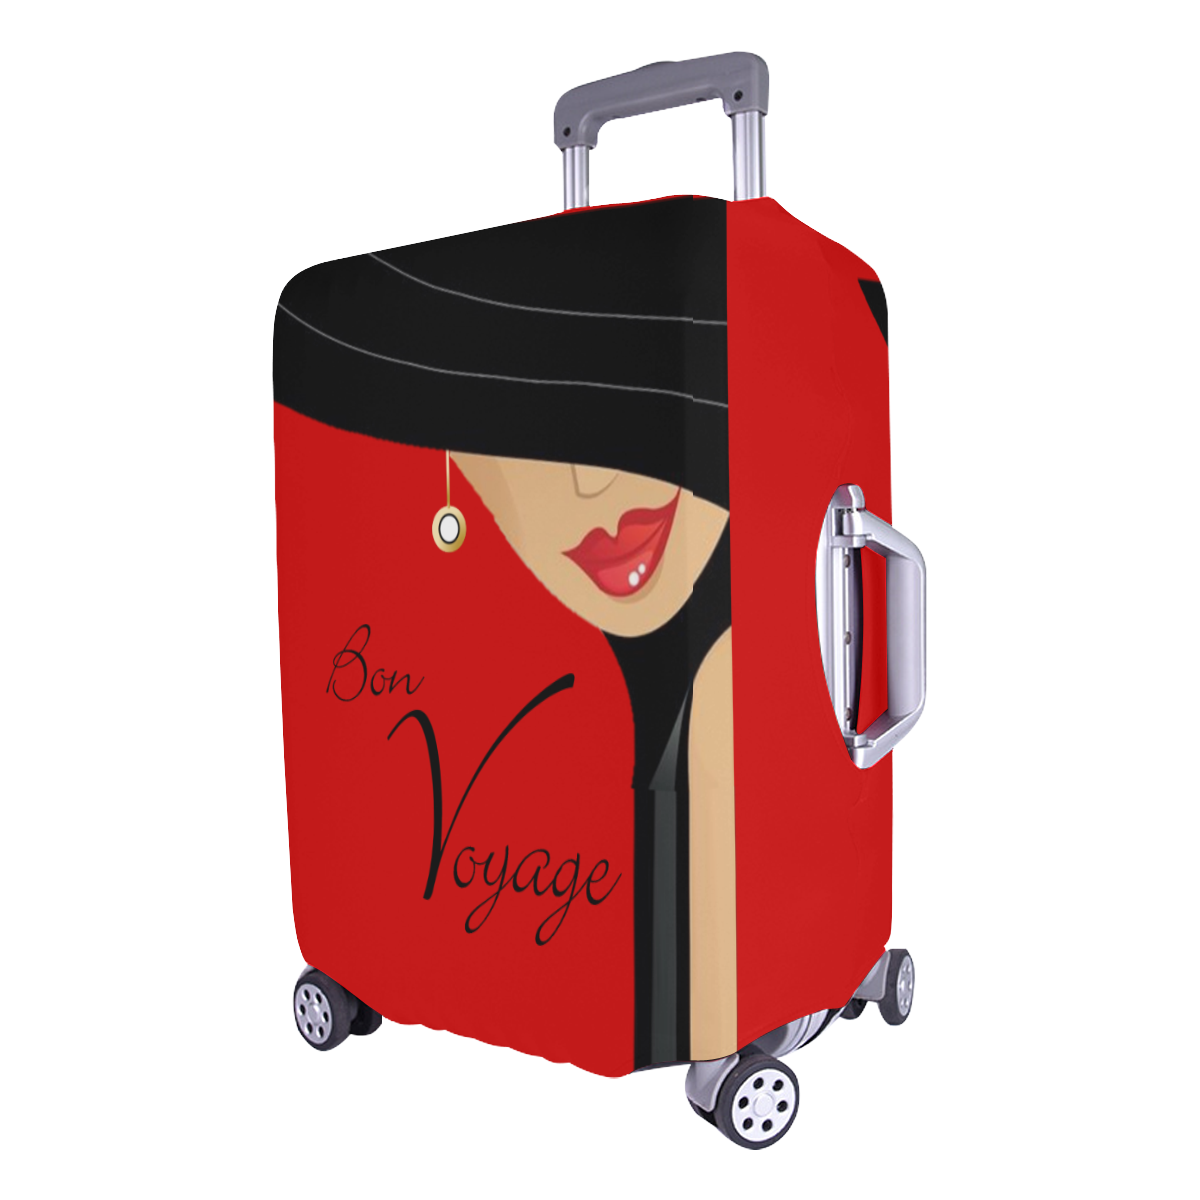 Bon Voyage Woman Luggage Cover Red Luggage Cover/Large 26"-28"